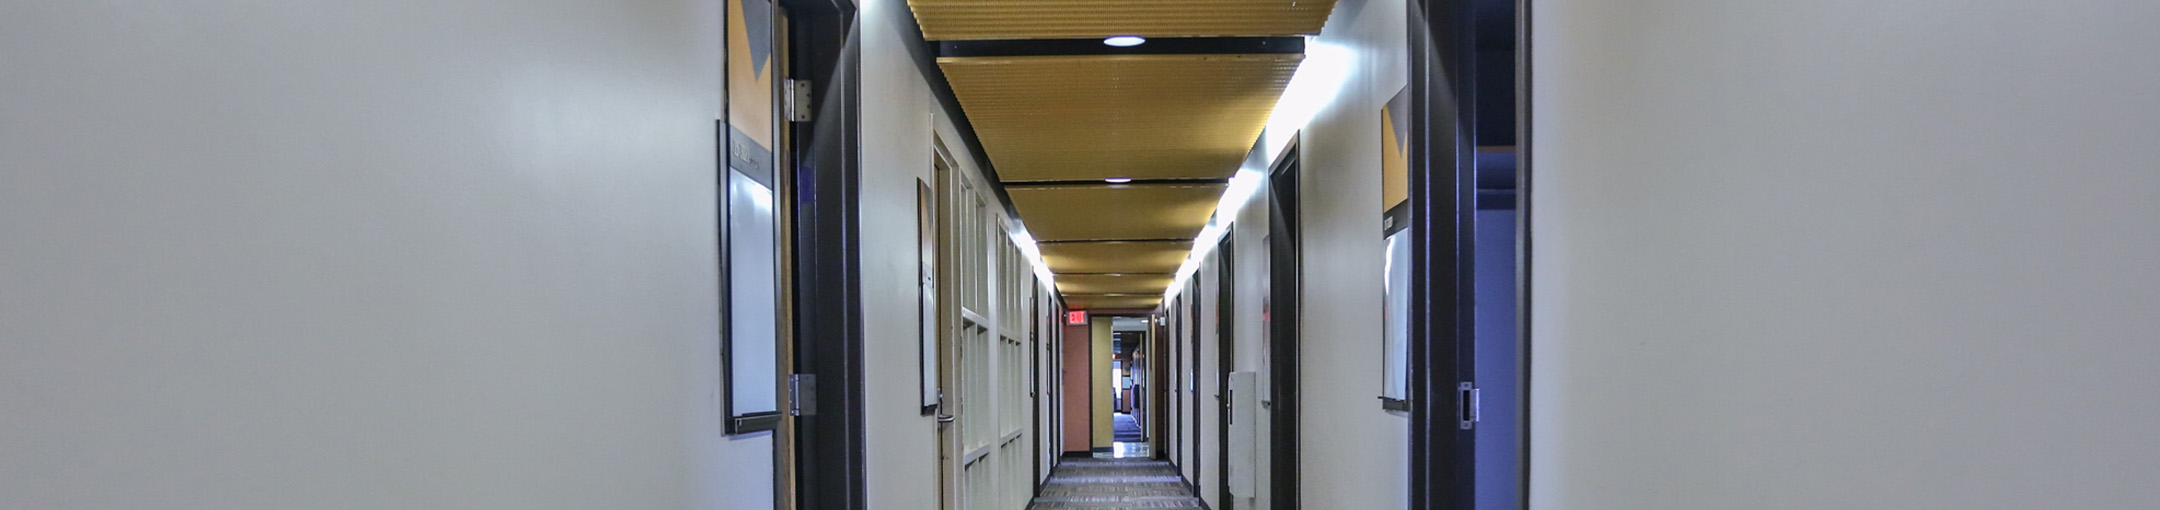 hallway of residence hall with gray wayy and wood ceiling